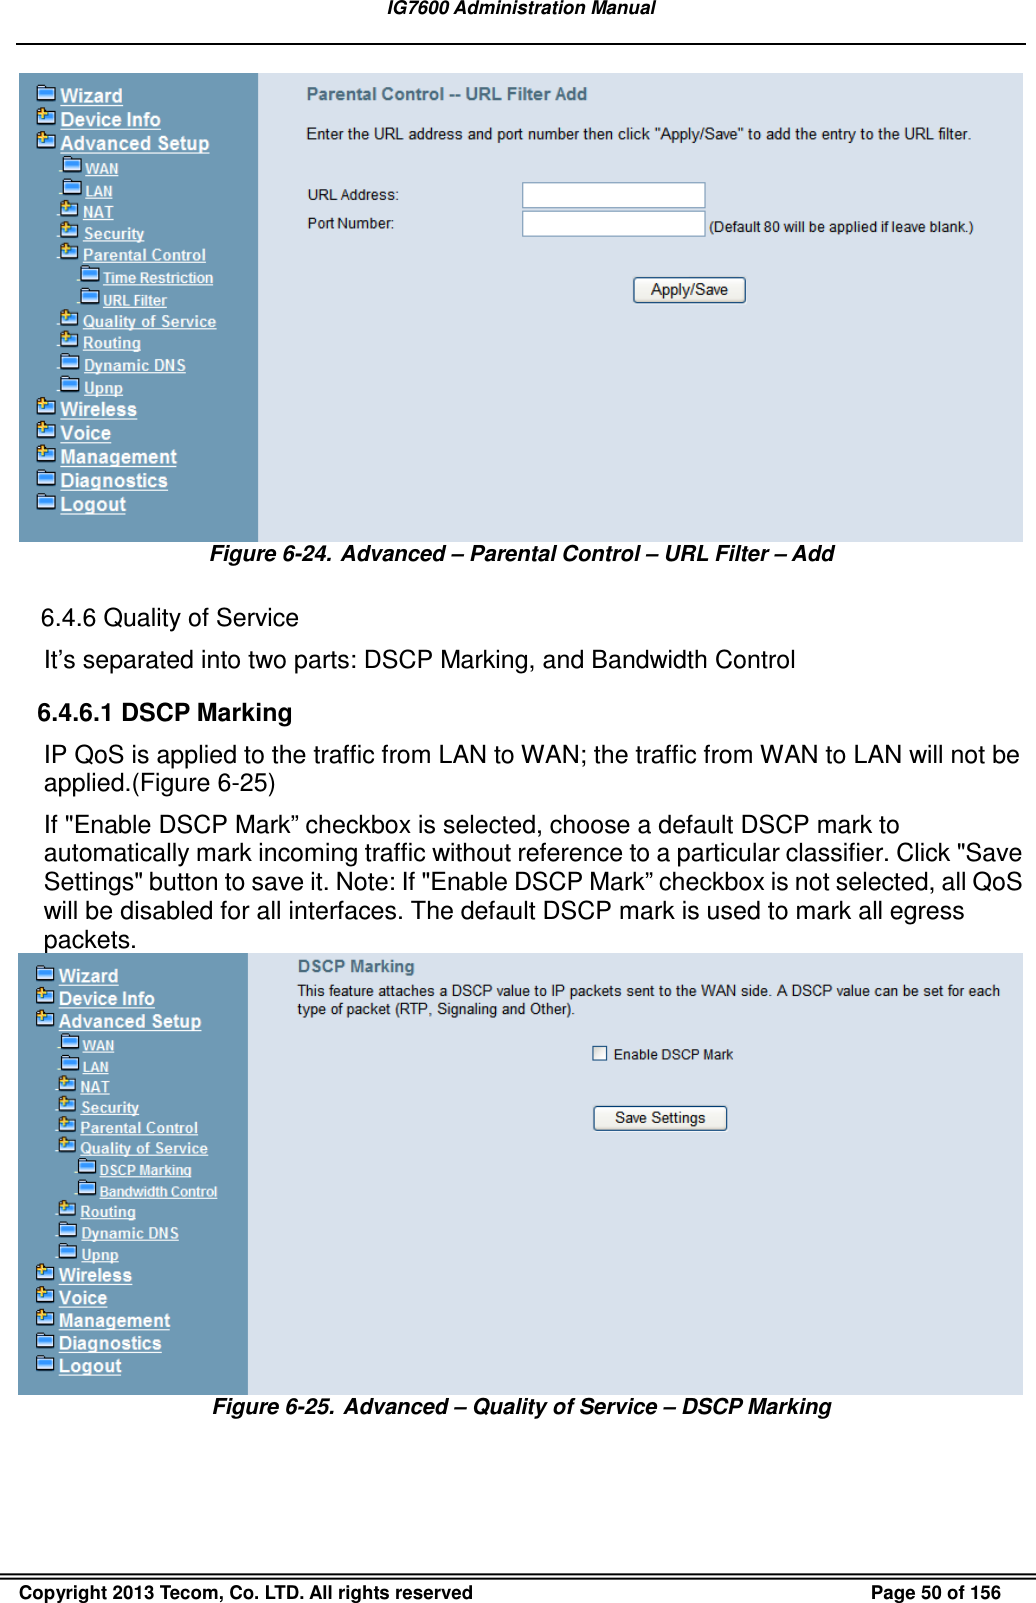 IG7600 Administration Manual  Copyright 2013 Tecom, Co. LTD. All rights reserved  Page 50 of 156  Figure 6-24.  Advanced – Parental Control – URL Filter – Add  6.4.6 Quality of Service It’s separated into two parts: DSCP Marking, and Bandwidth Control 6.4.6.1 DSCP Marking IP QoS is applied to the traffic from LAN to WAN; the traffic from WAN to LAN will not be applied.(Figure 6-25) If &quot;Enable DSCP Mark” checkbox is selected, choose a default DSCP mark to automatically mark incoming traffic without reference to a particular classifier. Click &quot;Save Settings&quot; button to save it. Note: If &quot;Enable DSCP Mark” checkbox is not selected, all QoS will be disabled for all interfaces. The default DSCP mark is used to mark all egress packets.  Figure 6-25.  Advanced – Quality of Service – DSCP Marking 